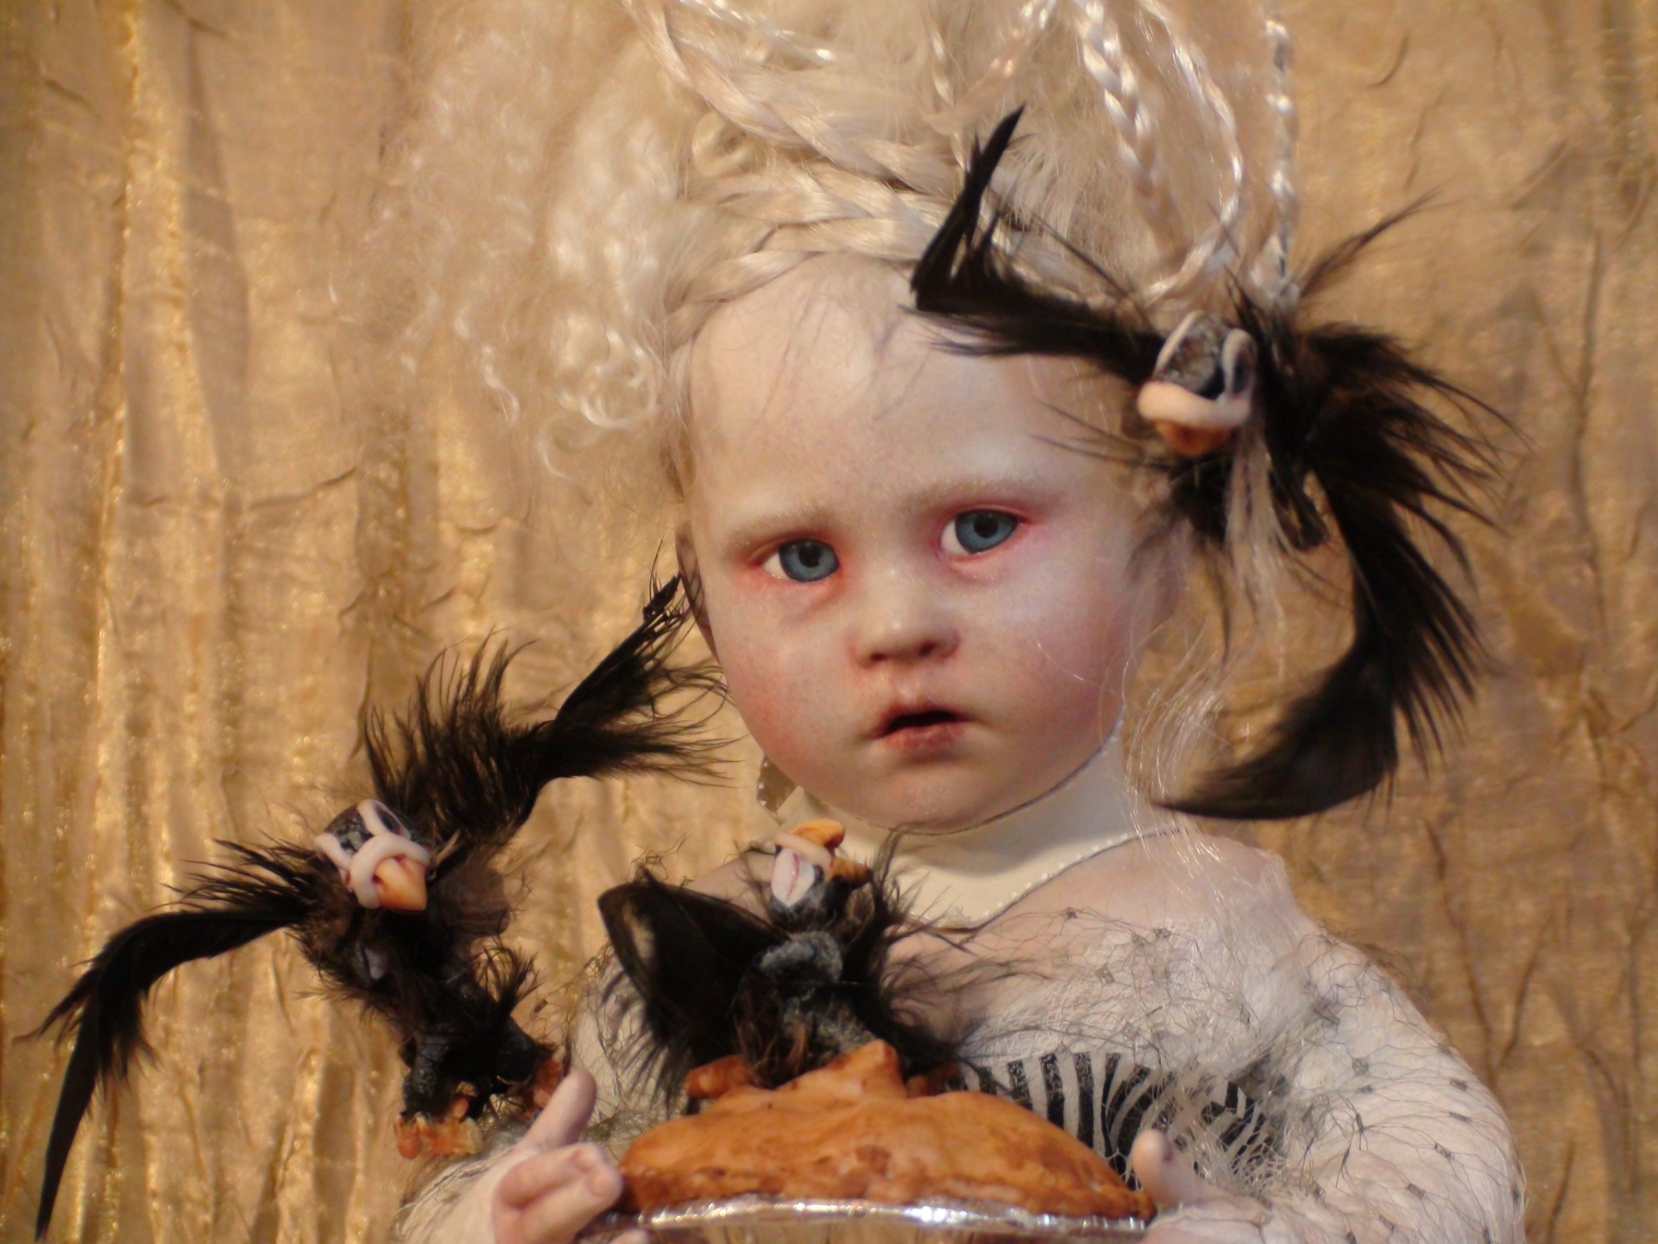 close-up gothic artdoll pale with blond braids and blue eyes black birds flying around her out of pie she holds